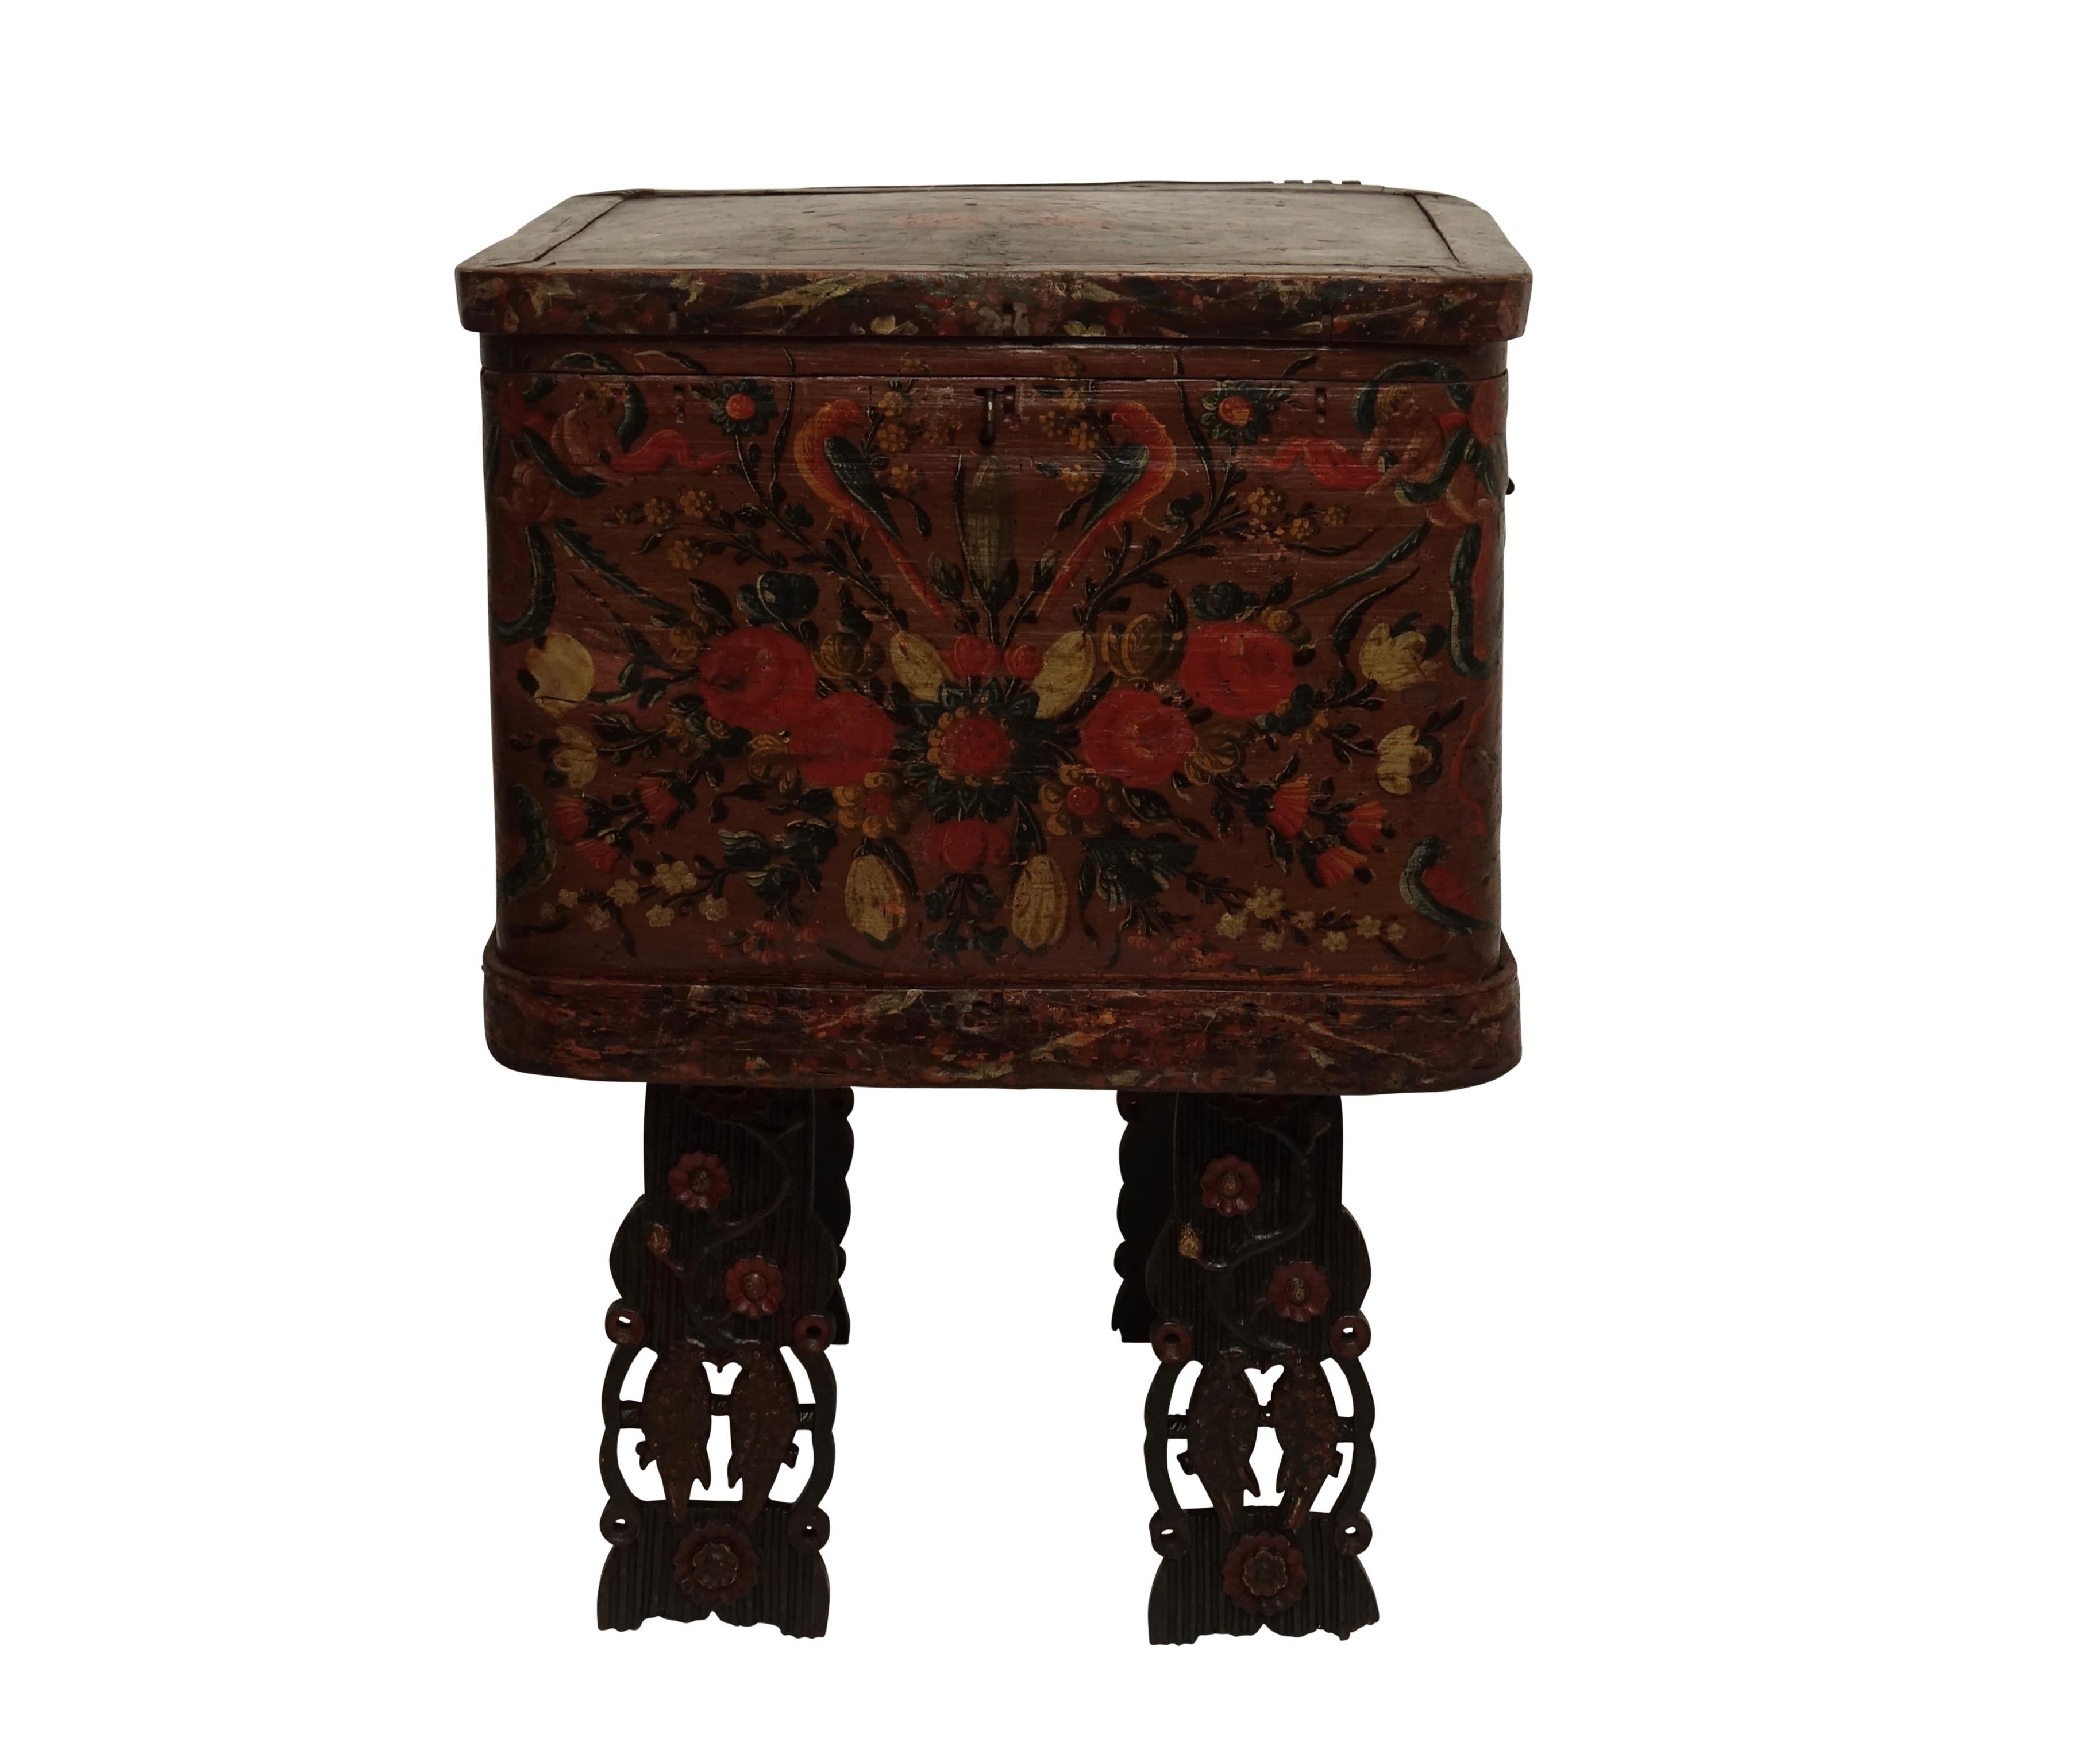 Colorful and brightly painted all-over with flowers and love birds, marriage or dowery chest on carved and painted legs, Scandinavian, circa 1800.